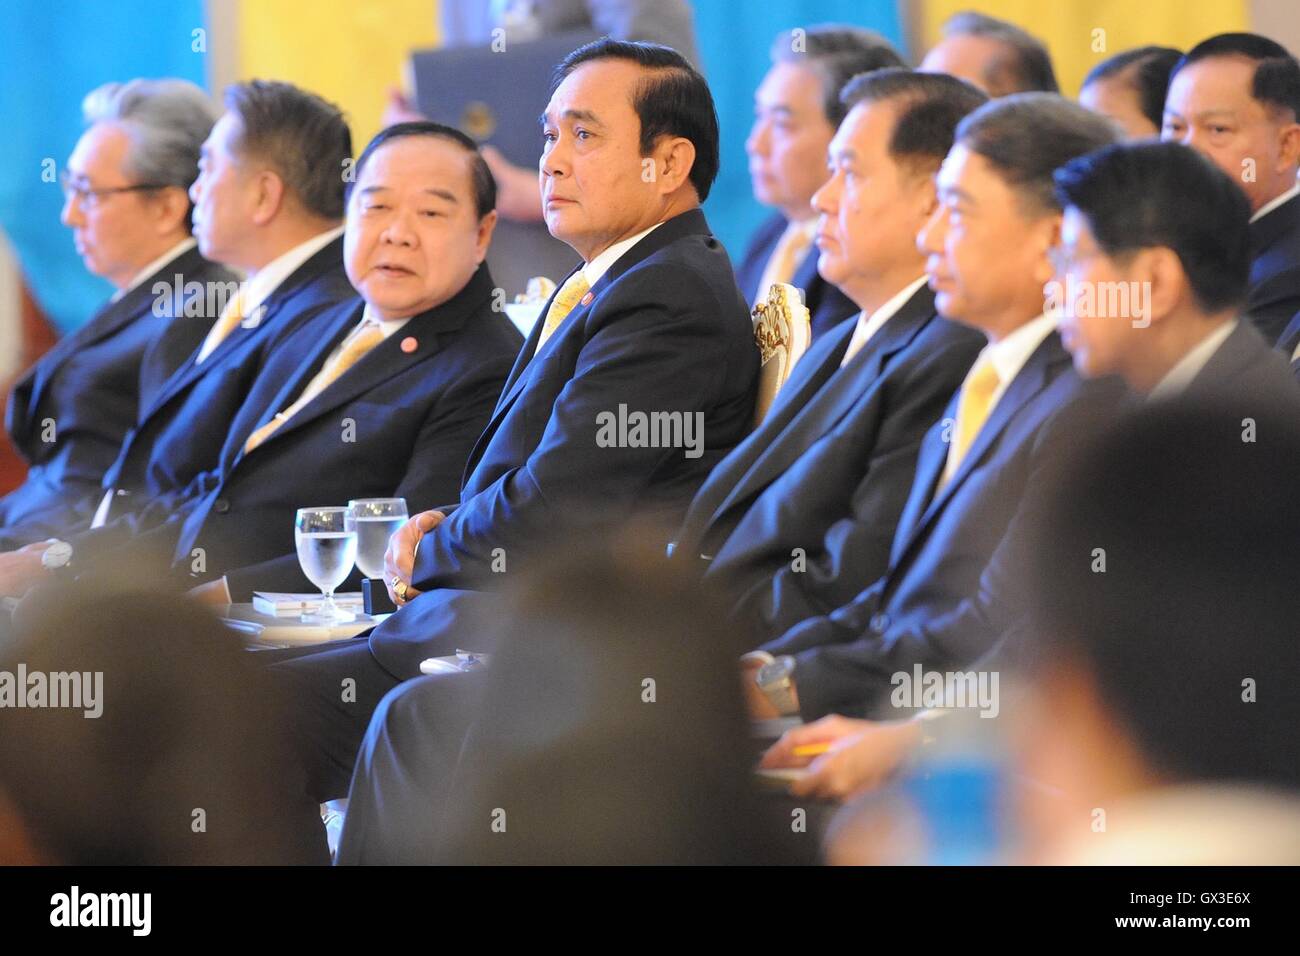 Bangkok, Thailand. 15th Sep, 2016. Thai Prime Minister Prayut Chan-o-cha (4th L) attends a press conference on the performances of the government during the last two years, at the Thai Government House in Bangkok, capital of Thailand, on Sept. 15, 2016. Thailand could potentially upgrade itself from the long-standing status of a Third World developing country to a ''First World'' developed country, Thai Prime Minister Prayut Chan-o-cha said on Thursday. © Rachen Sageamsak/Xinhua/Alamy Live News Stock Photo